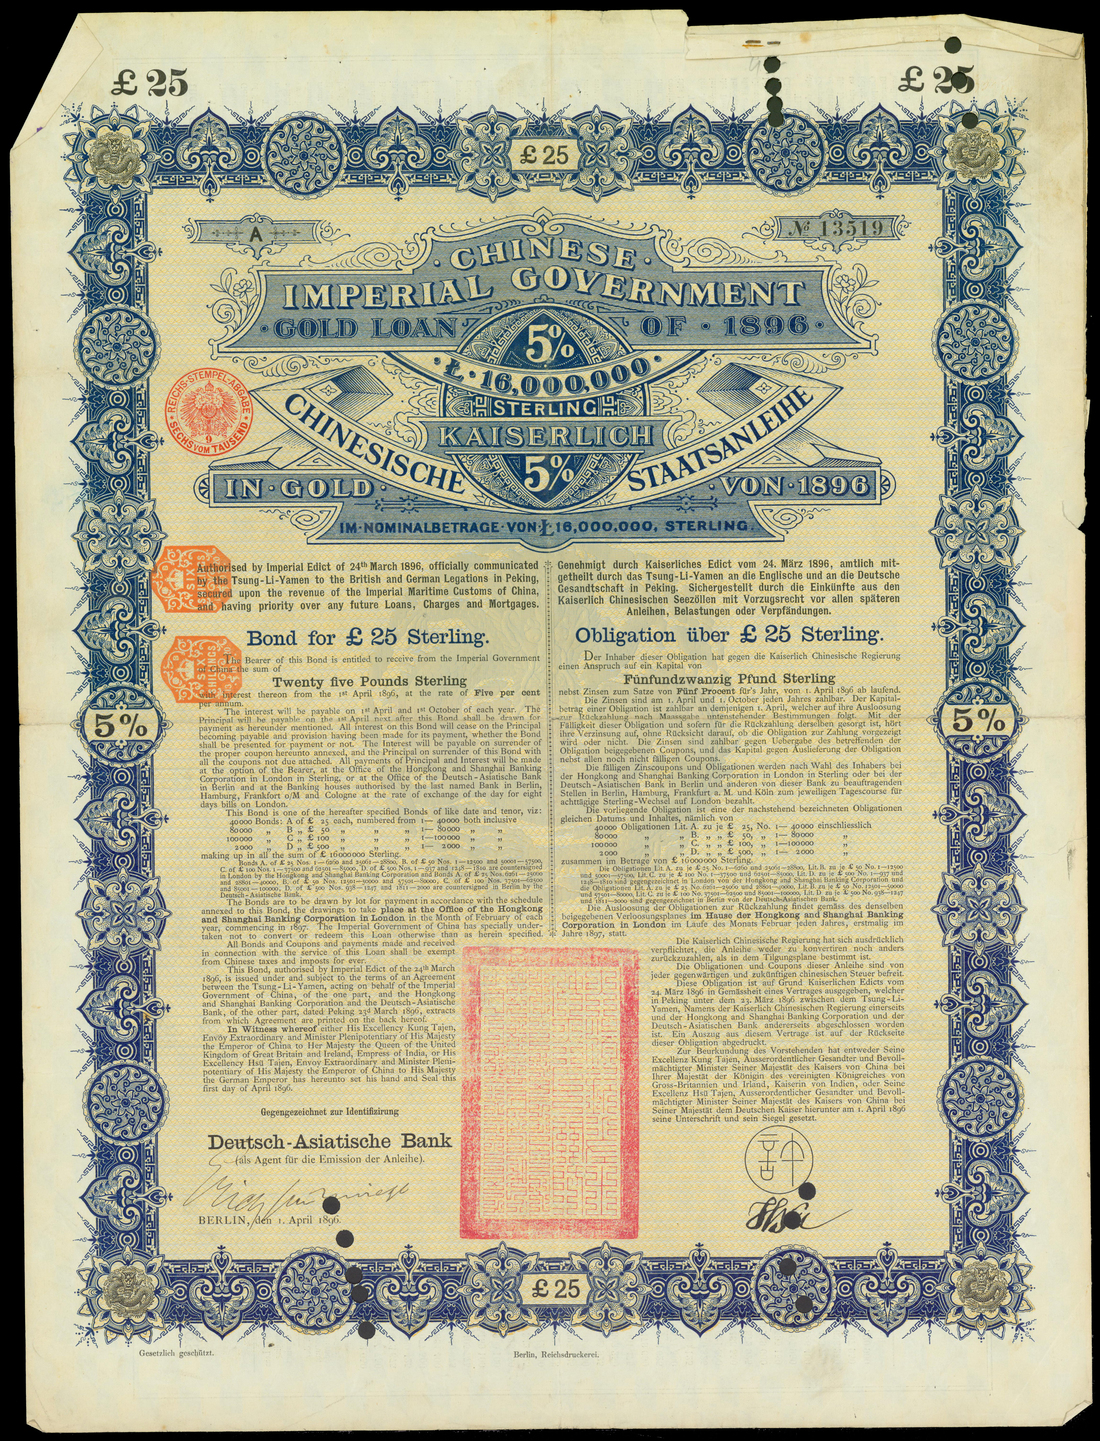 Chinese Imperial Government, 5% Gold Loan, 1896, 2 bonds for ¢G25,